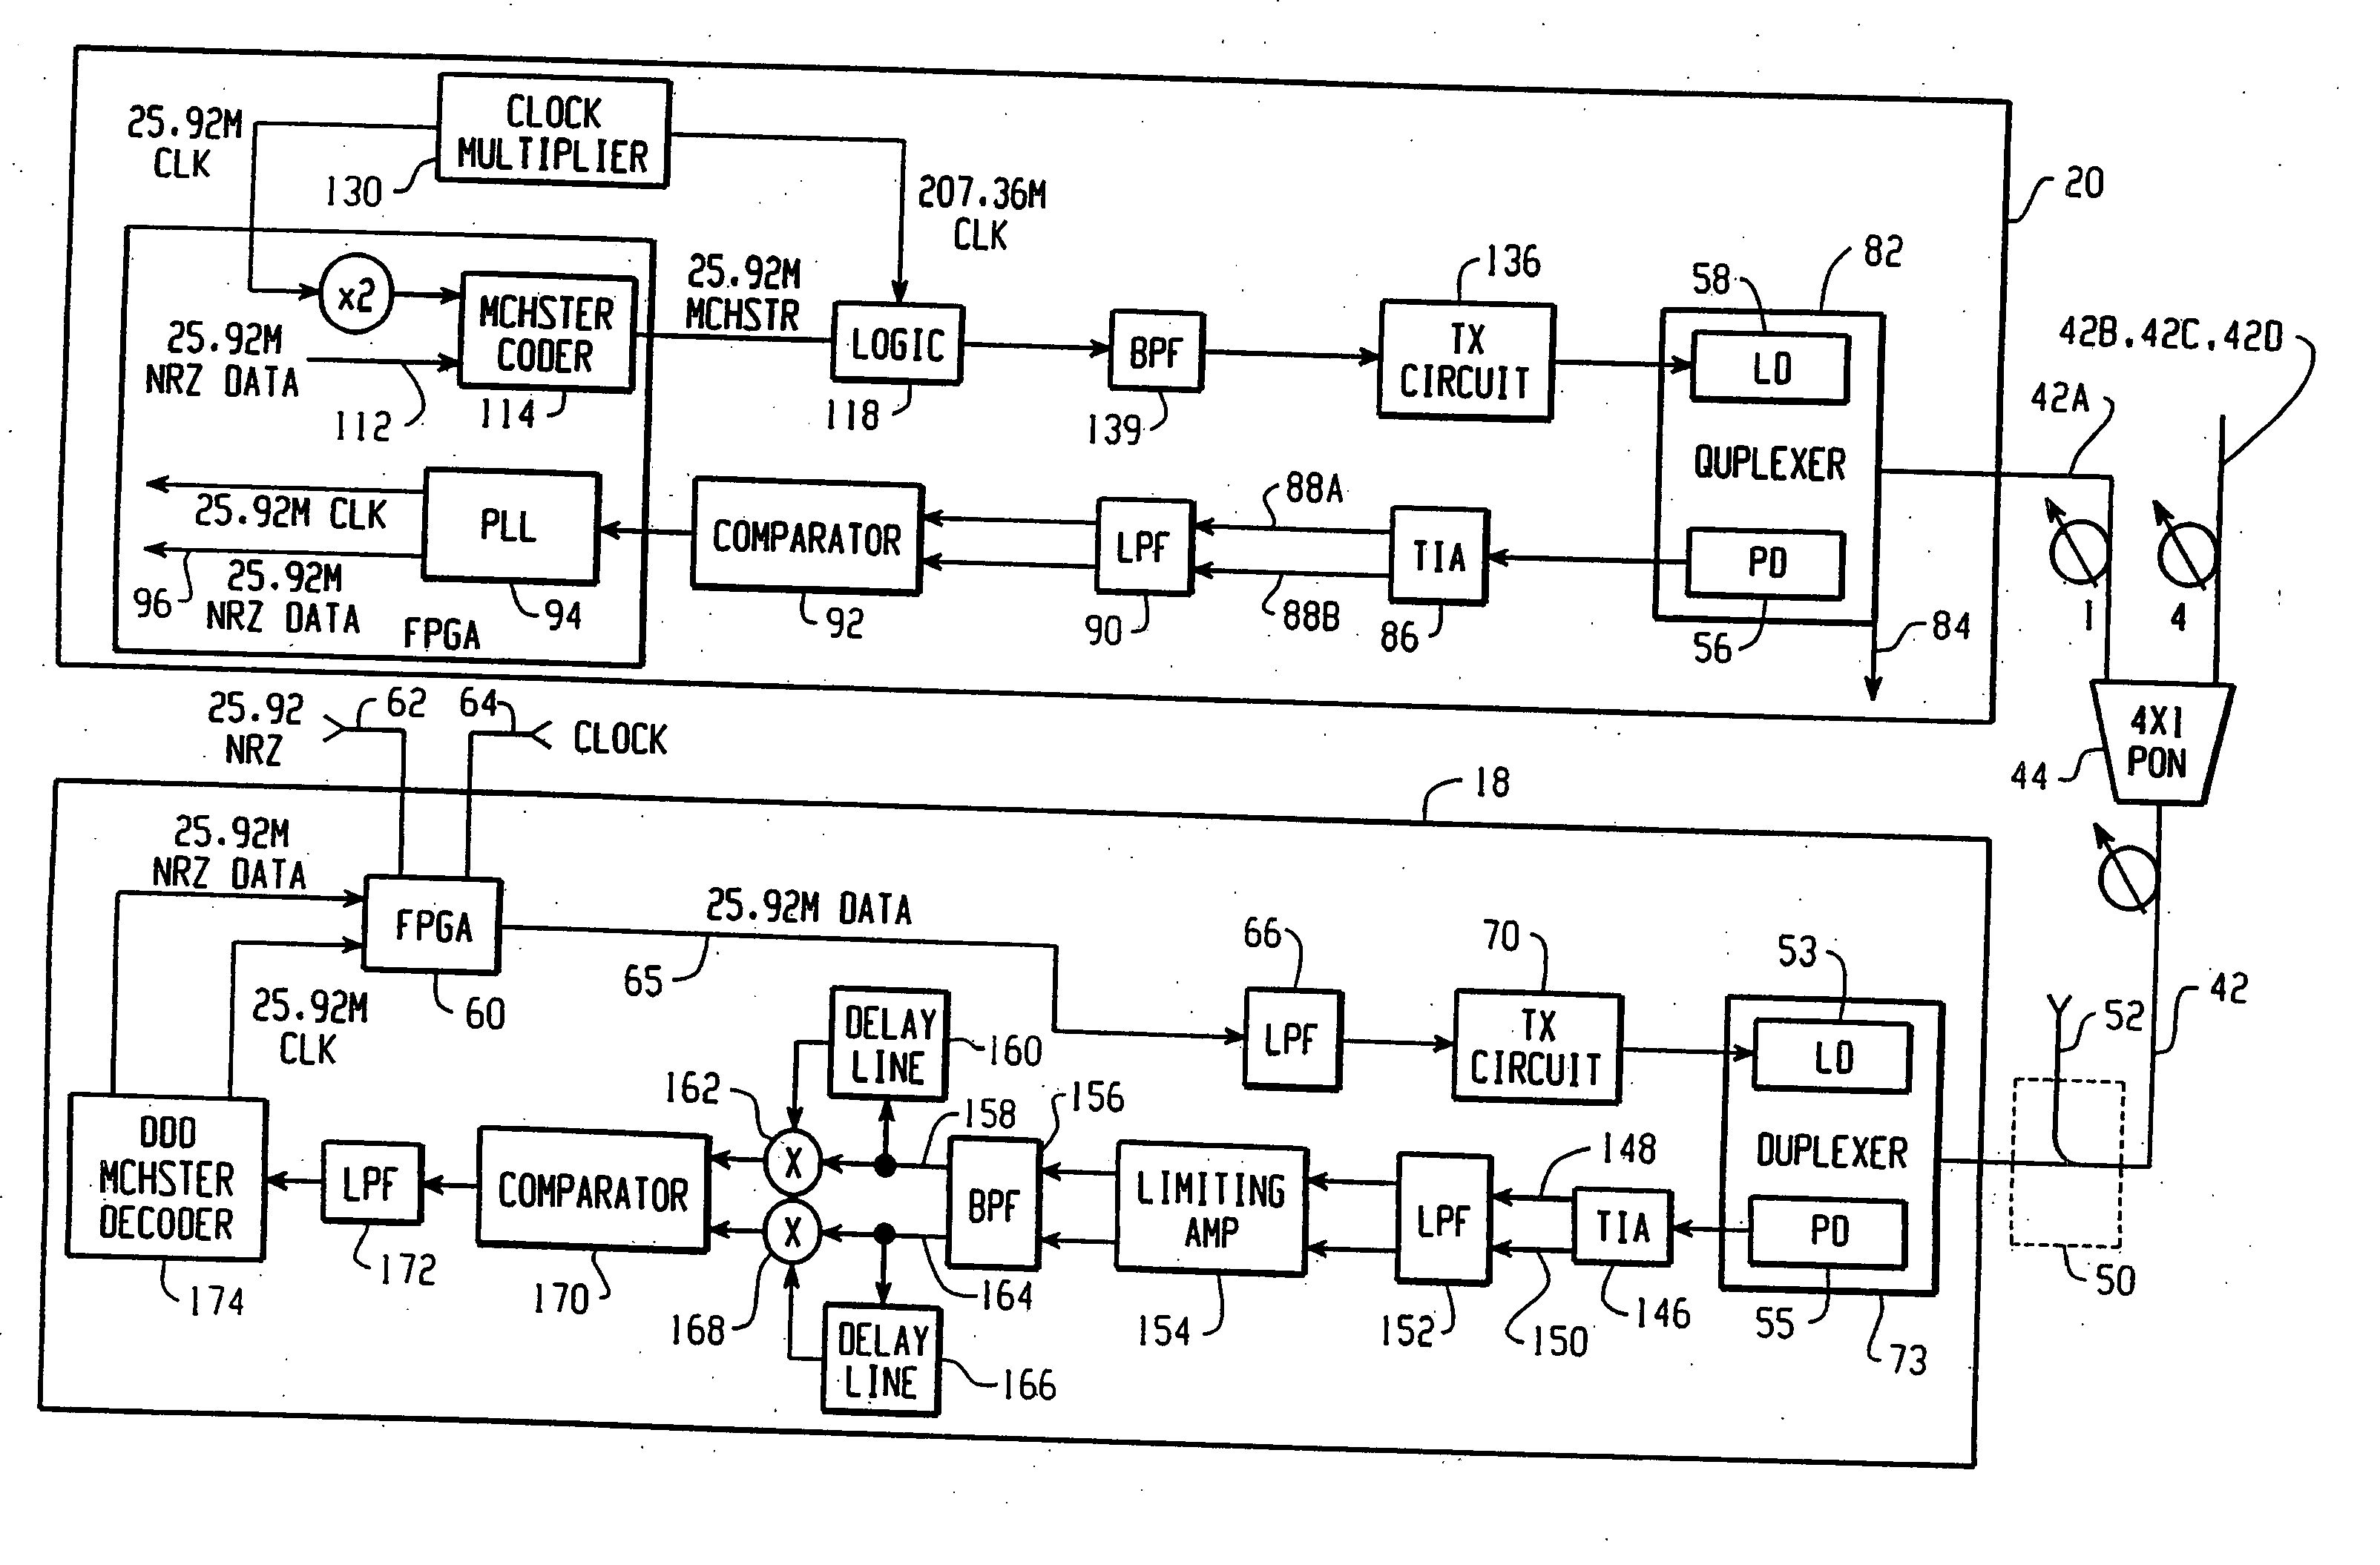 Bidirectional optical communications having quick data recovery without first establishing timing and phase lock